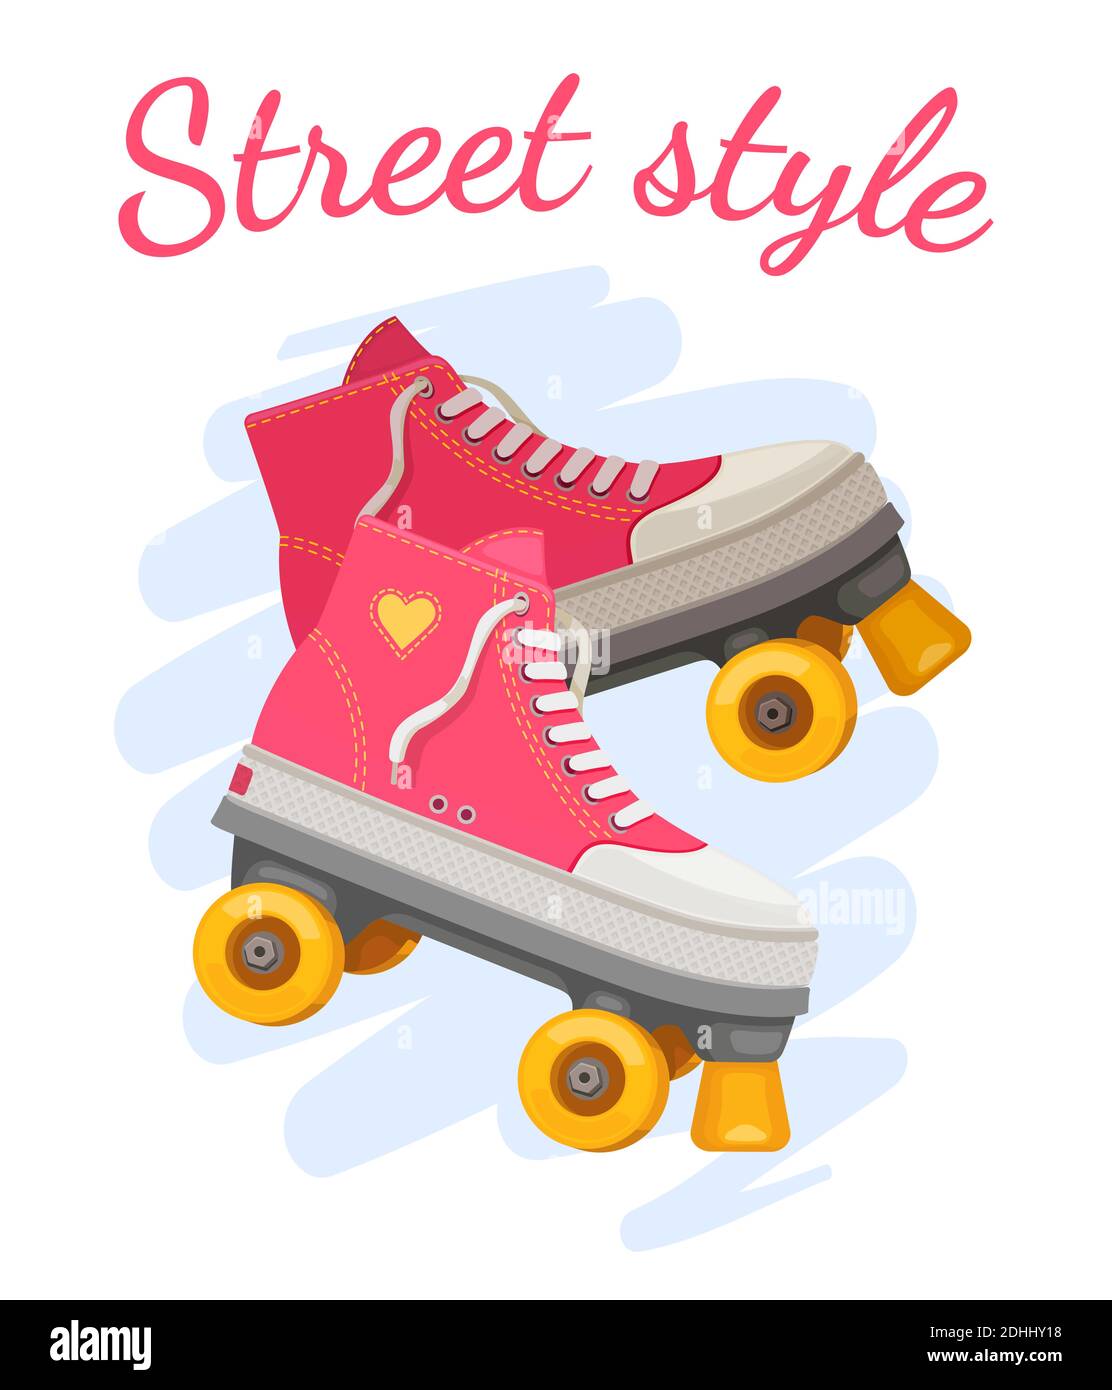 Roller girl print. Trendy pink rollers skate with heart and slogan street style. Retro summer girls fashion. Positive t-shirt vector design Stock Vector